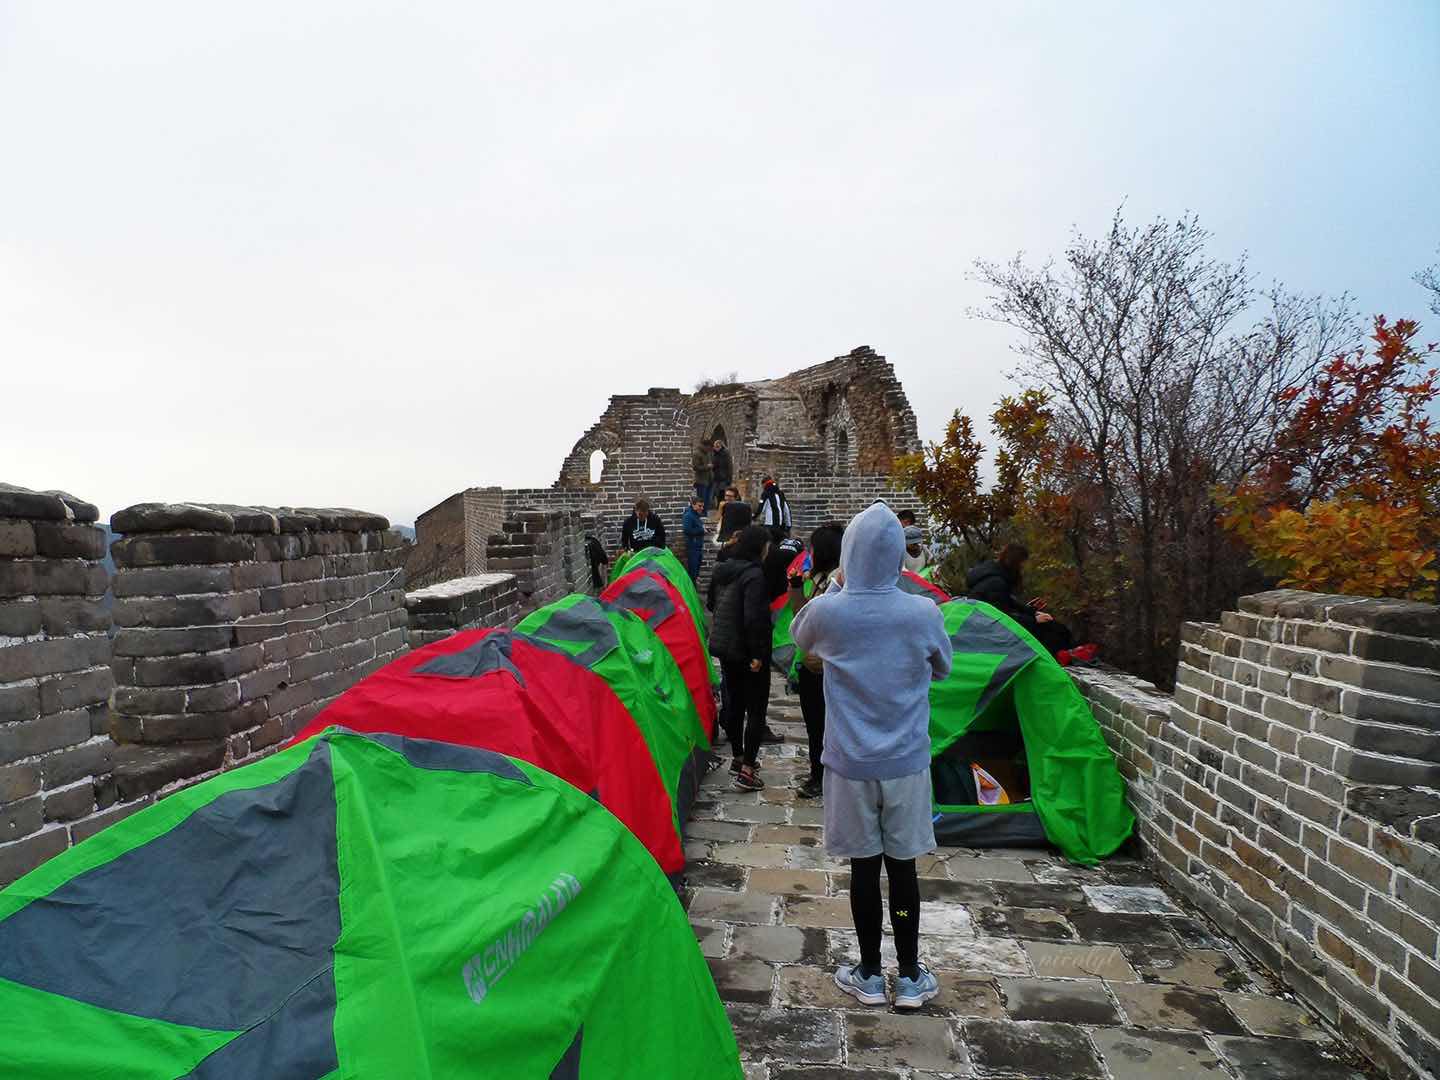 Camping on the Great Wall of China